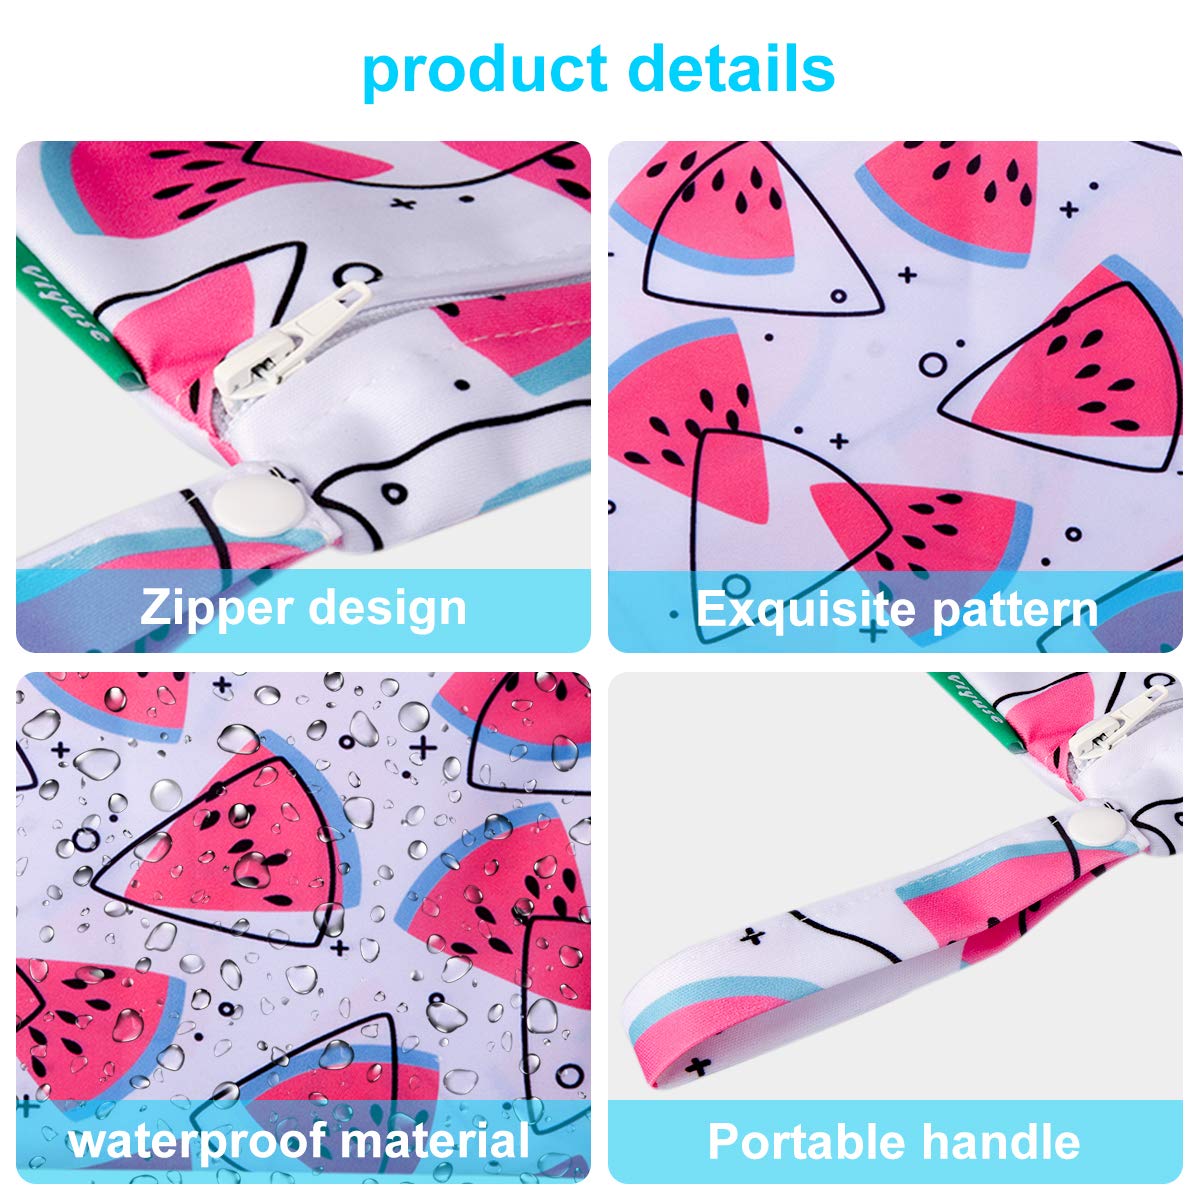 Viyuse wet bag for swimsuit 2pcs Cloth Diaper Wet Dry Bags enlarged version Washable Waterproof Two Zippered Pockets Infant Stroller Travel Beach Pool Gym Bag for Swimsuits & Wet Clothes